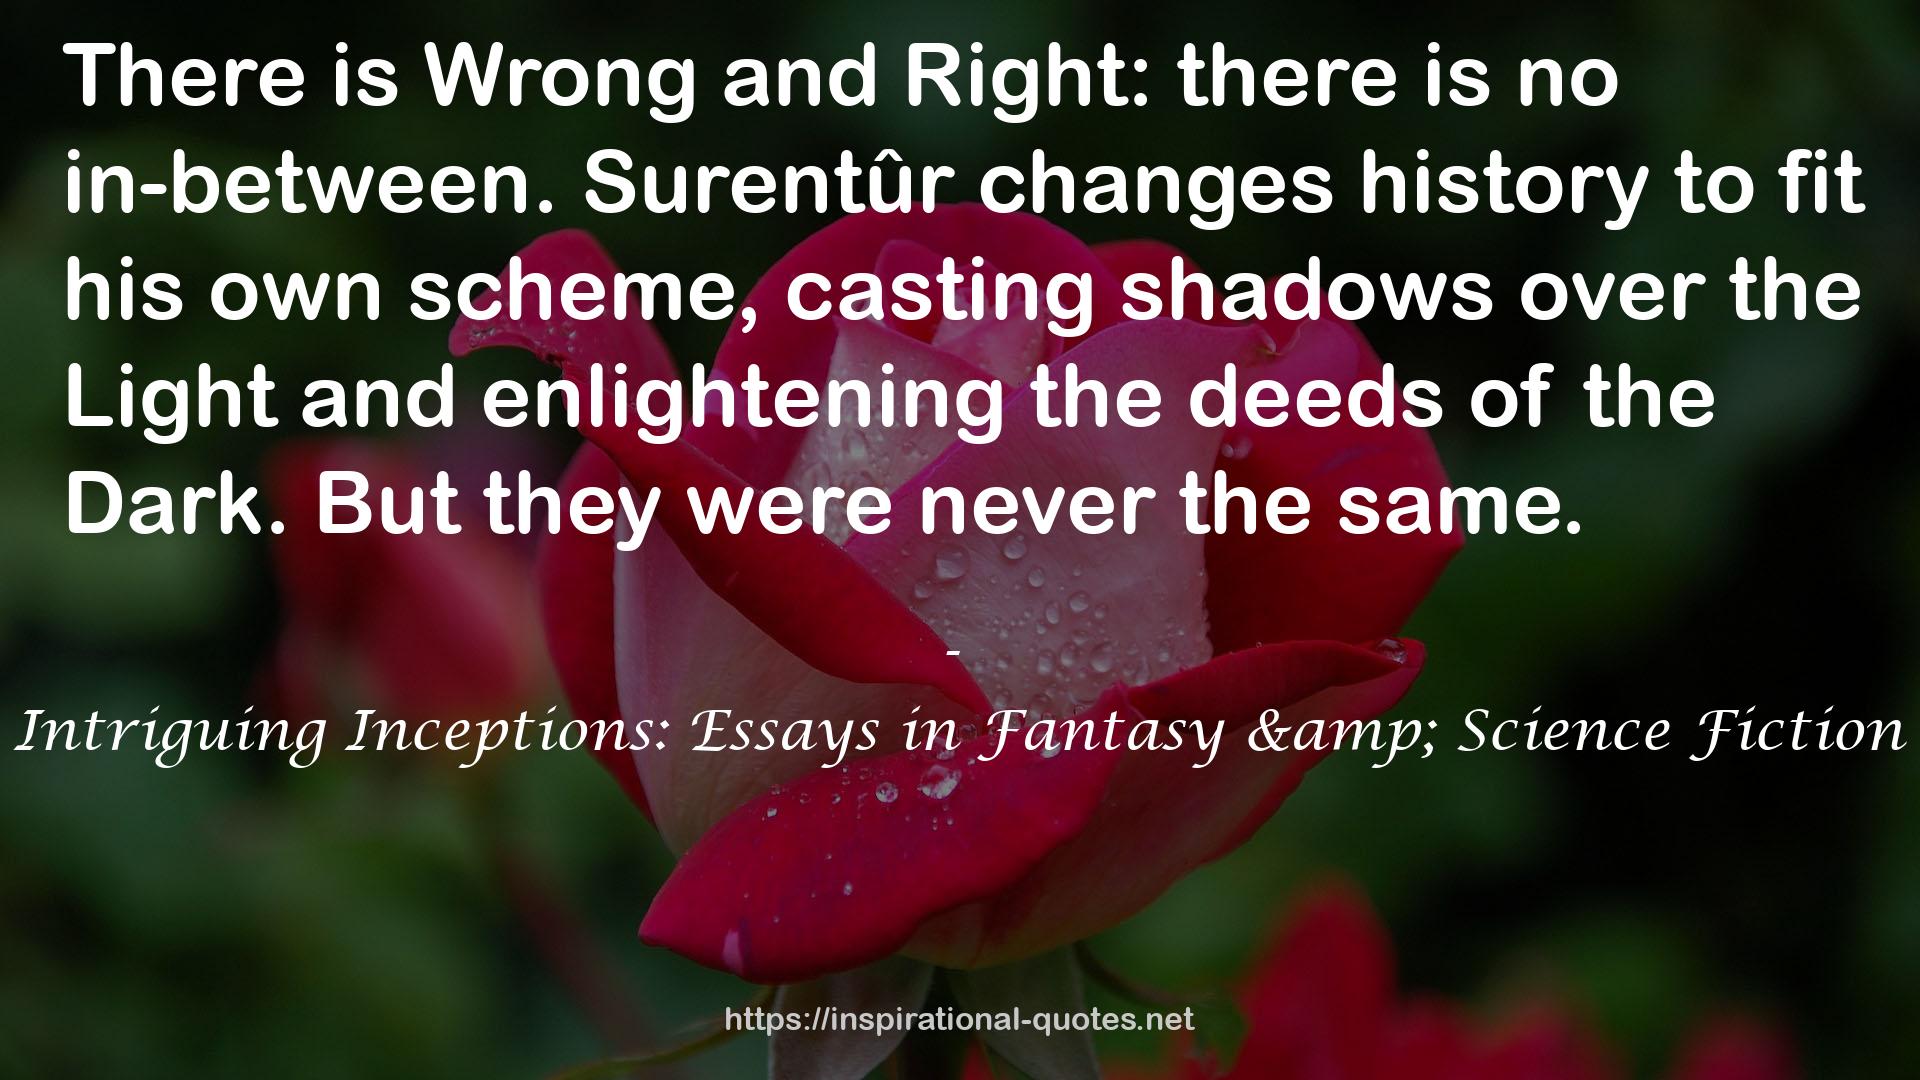 Intriguing Inceptions: Essays in Fantasy & Science Fiction QUOTES